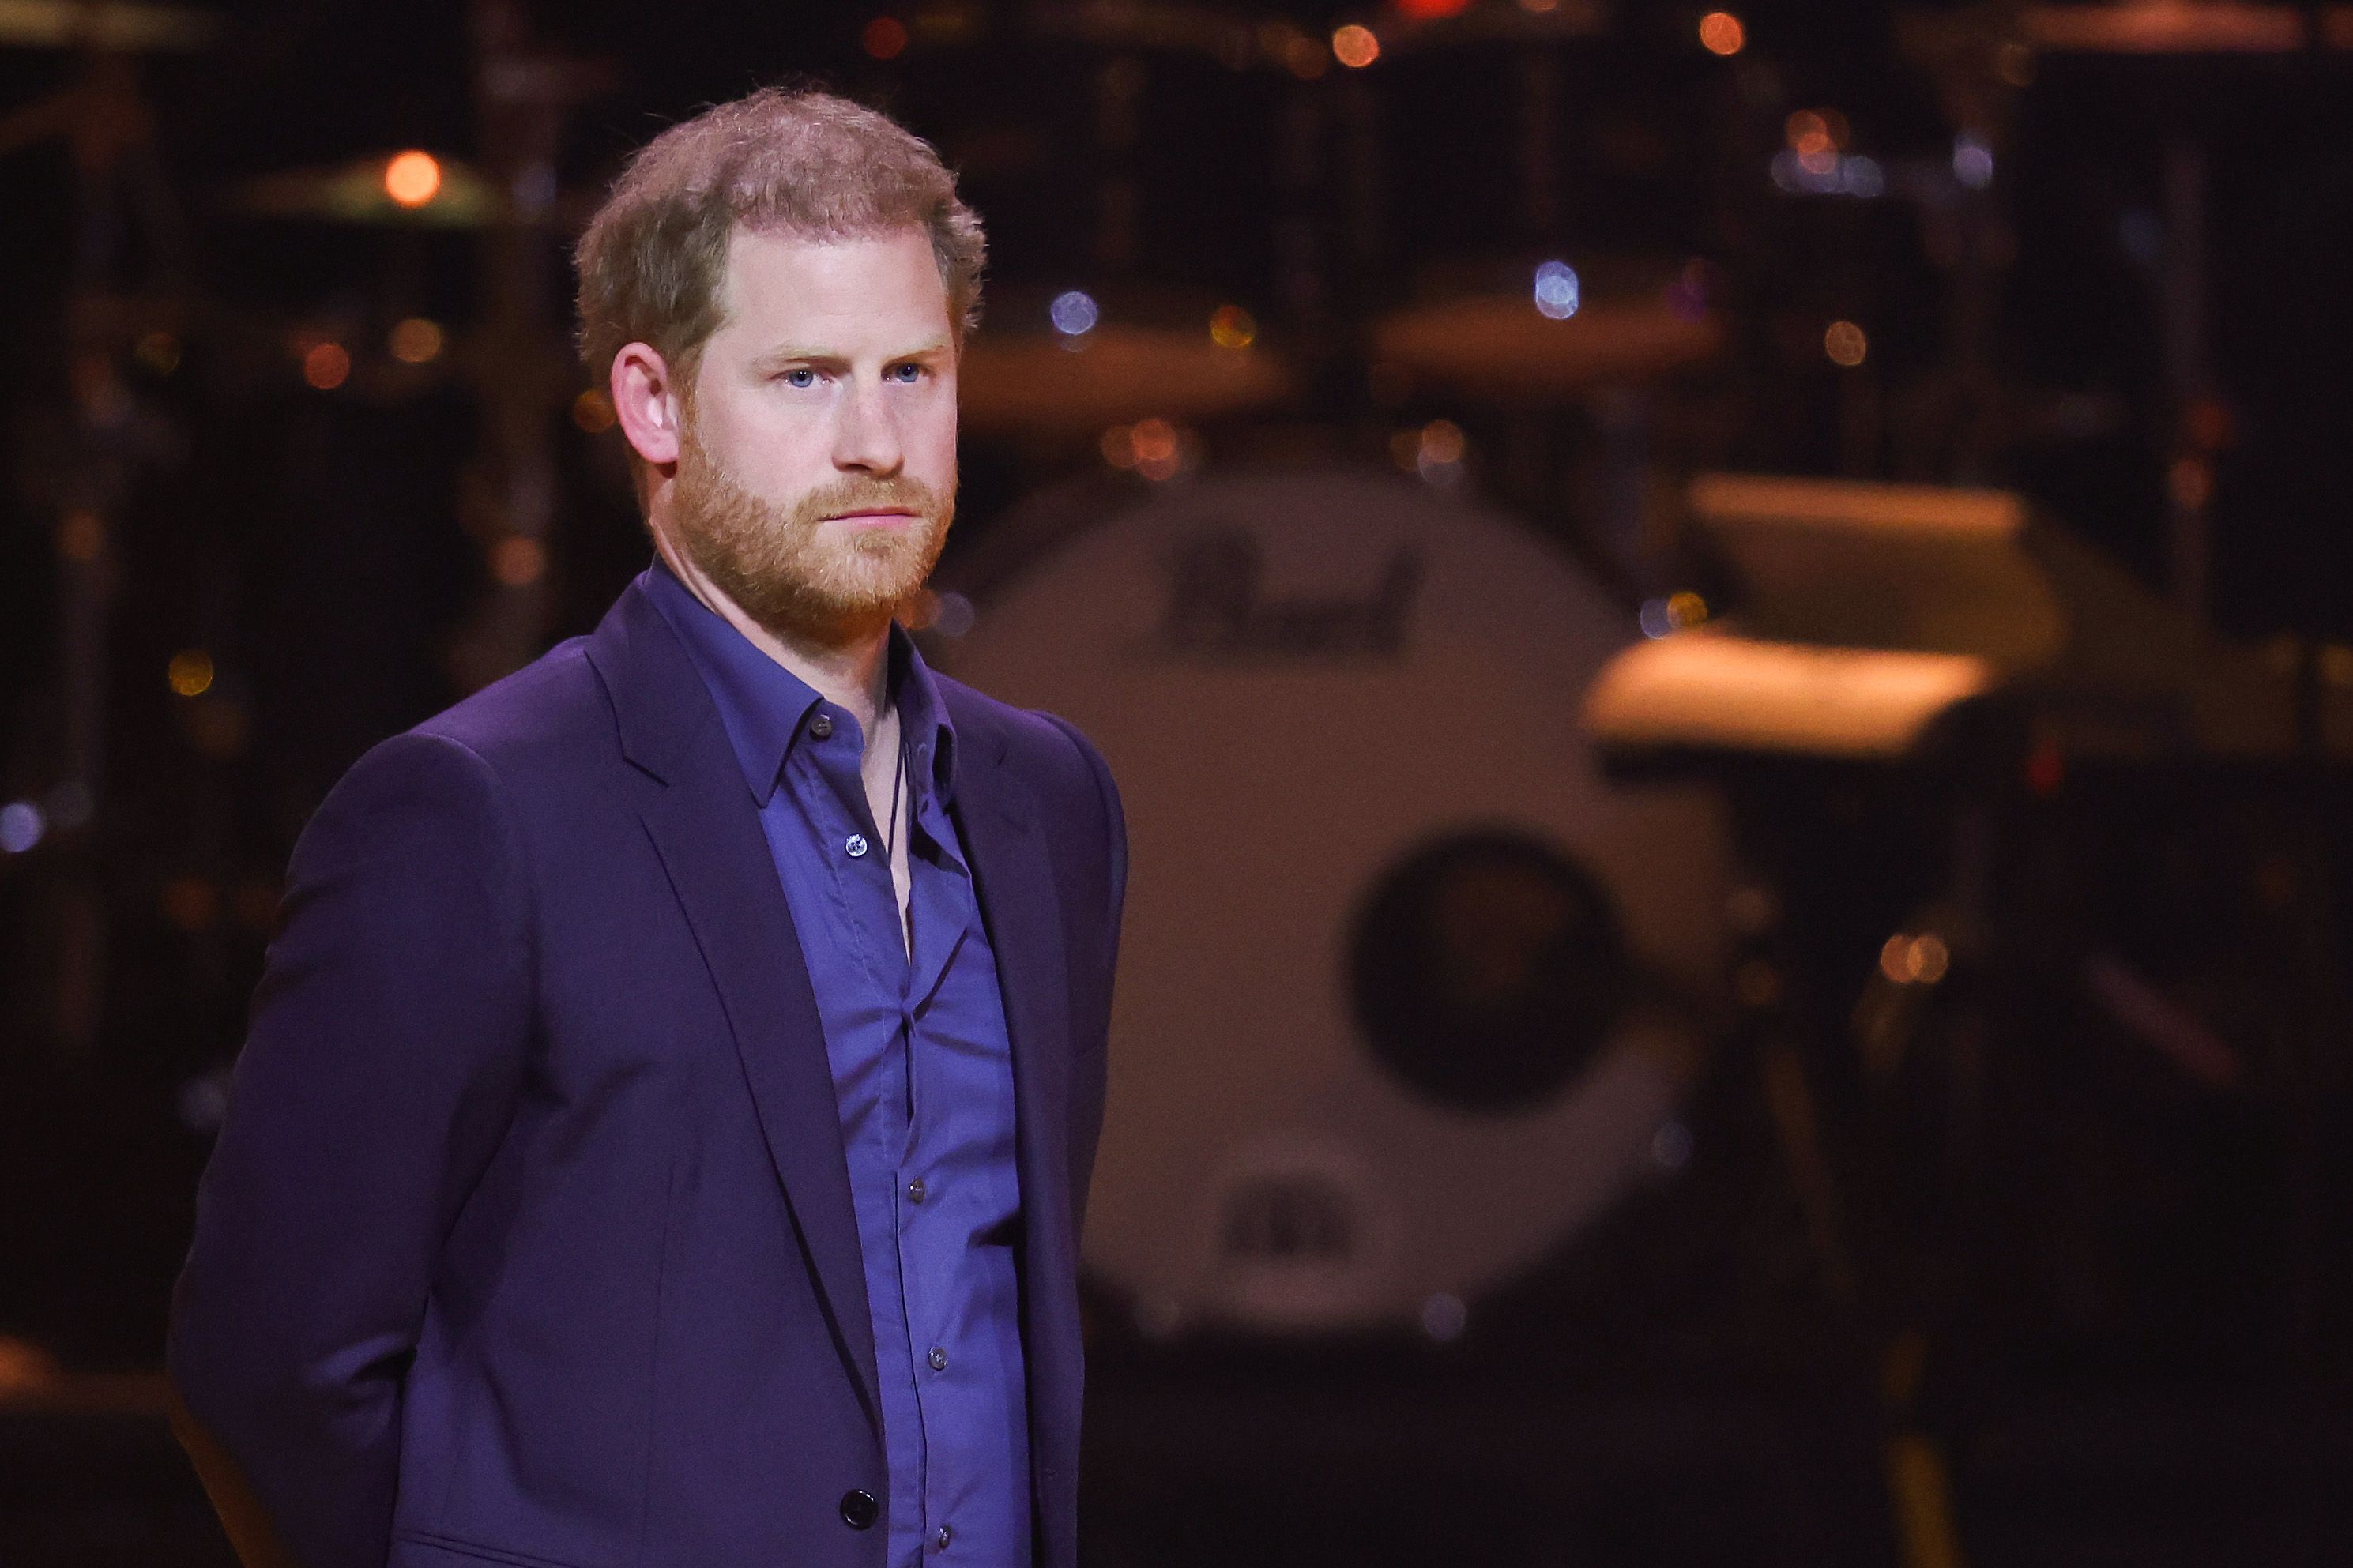 Royal Expert Questions Why Prince Harry Is Hell-Bent on ‘Digging Up’ Darkest and Most Painful Memories From His Past